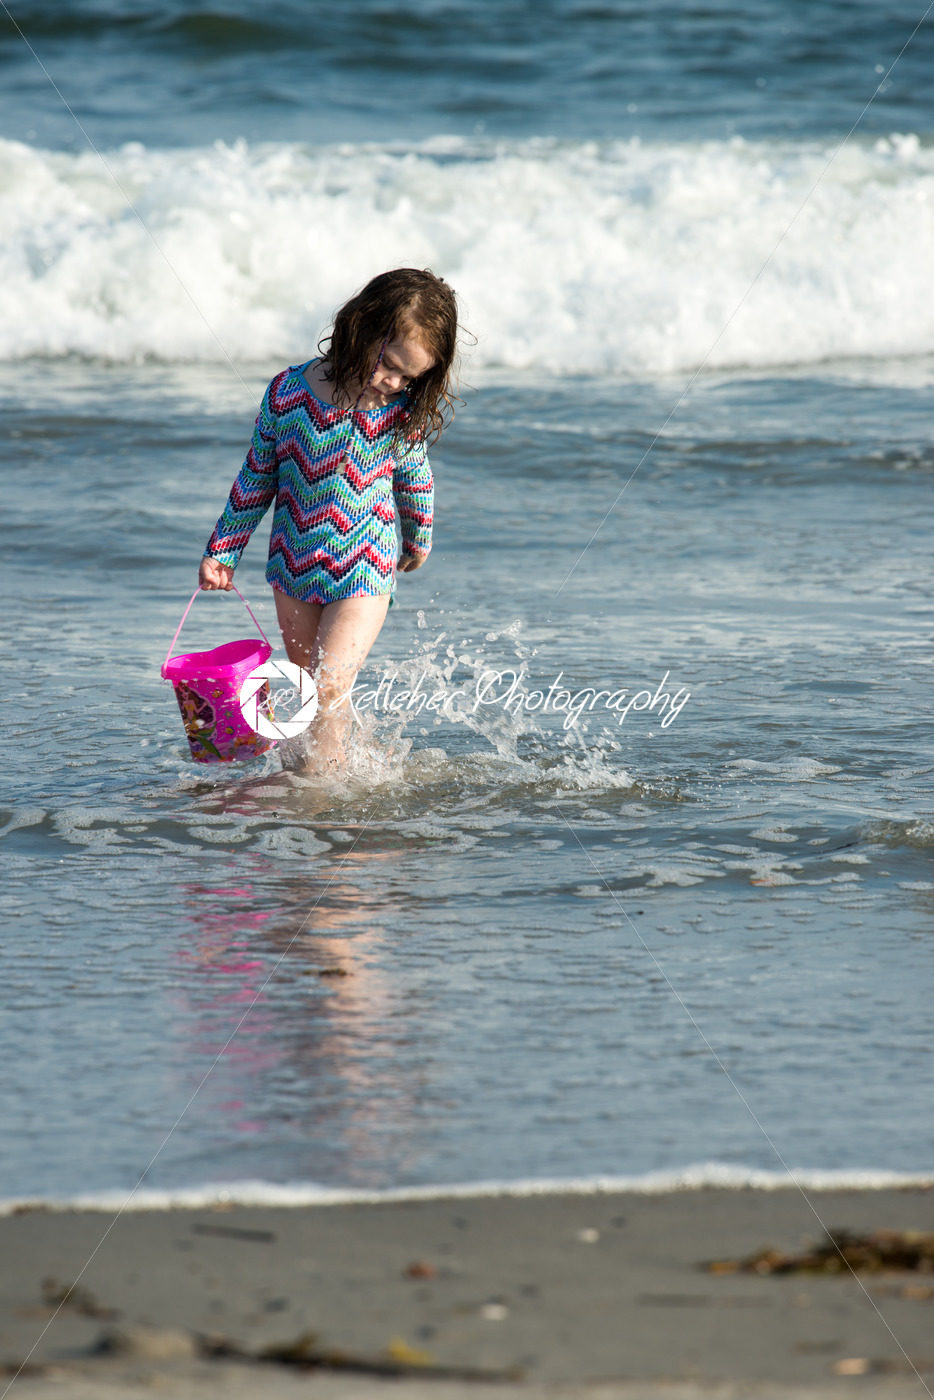 Young cute little girl playing at the seaside carrying a red bucket at the edge of the surf on a sandy beach in summer sunshine - Kelleher Photography Store